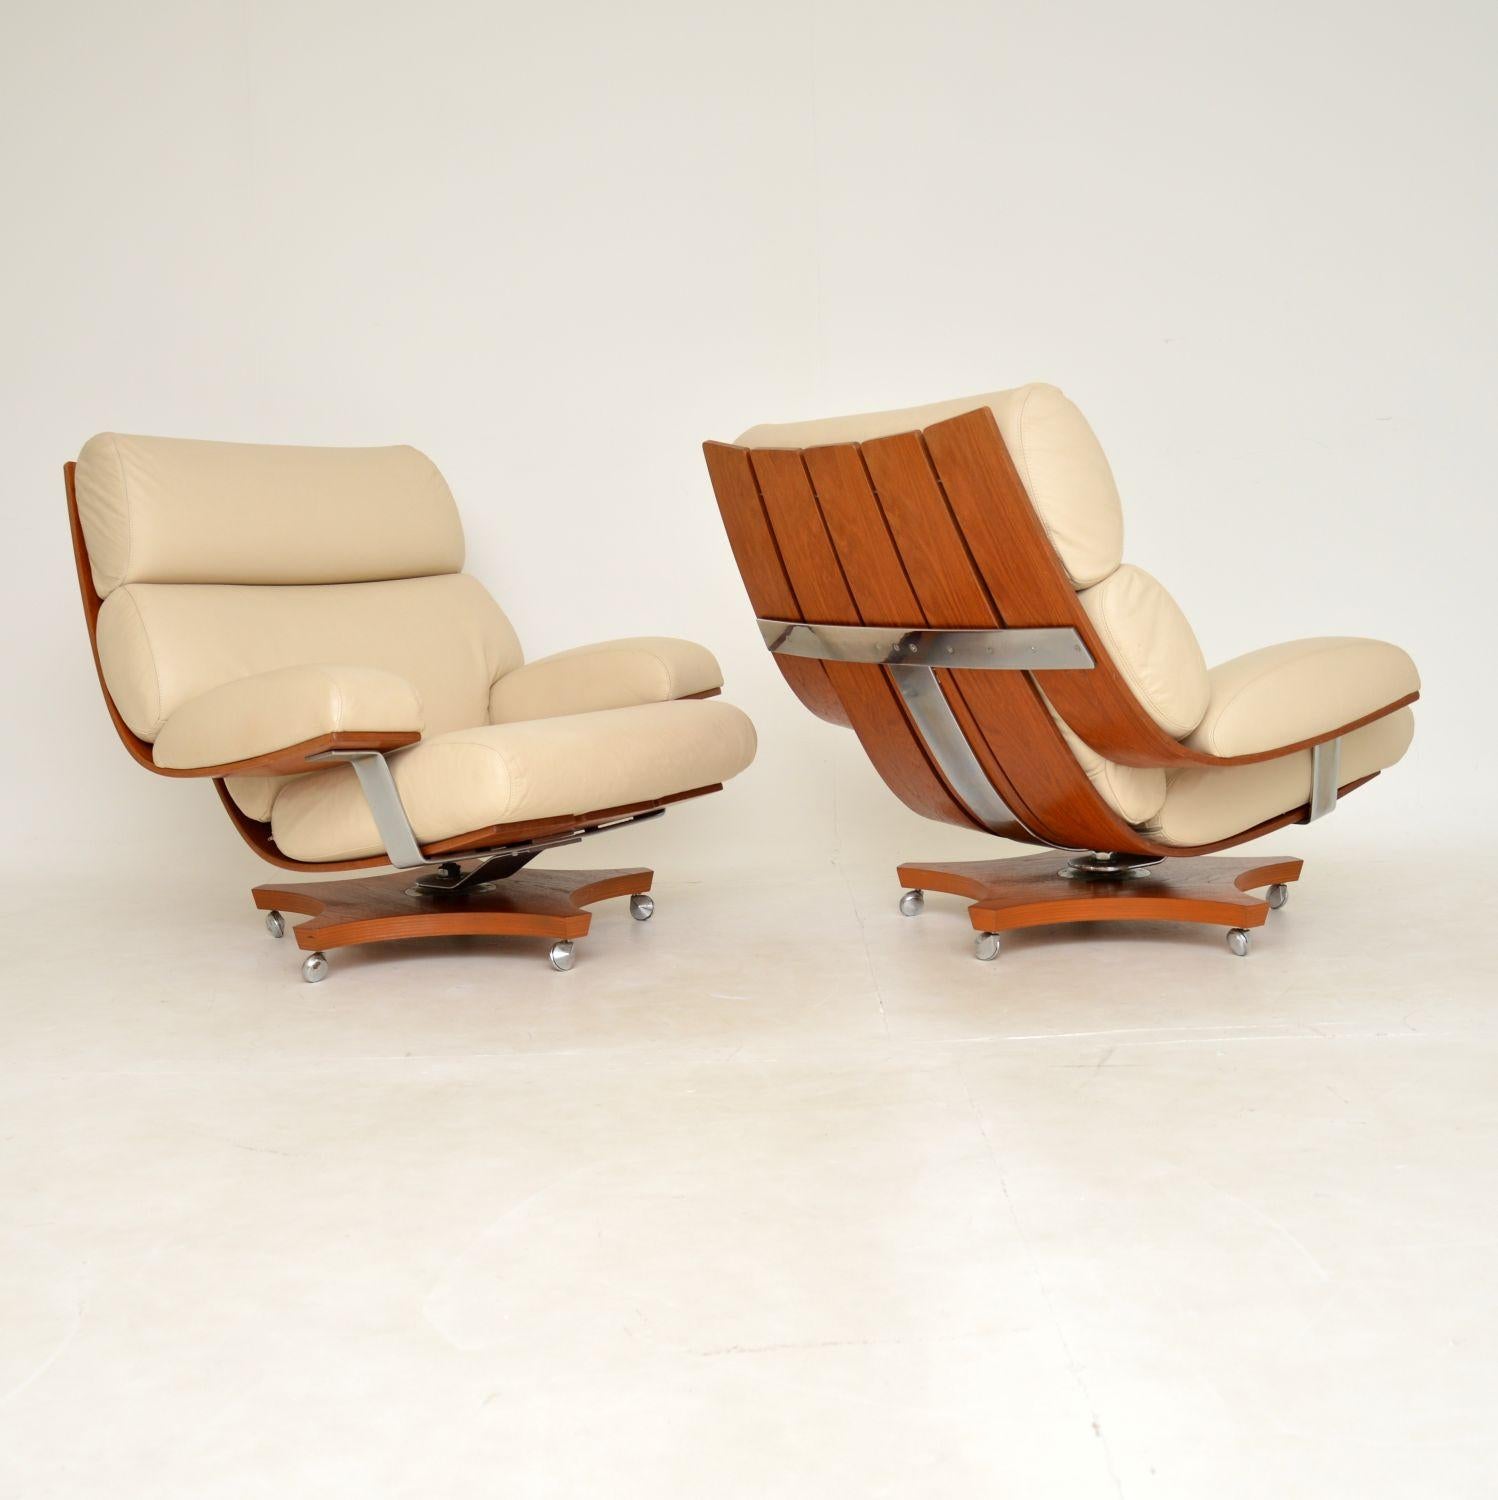 A stunning and exceptionally comfortable pair of vintage cream leather and teak Housemaster armchairs by G Plan. These were designed by KM Wilkins, they were made in England and date from the 1970’s.

This model is very rare and hard to find, to